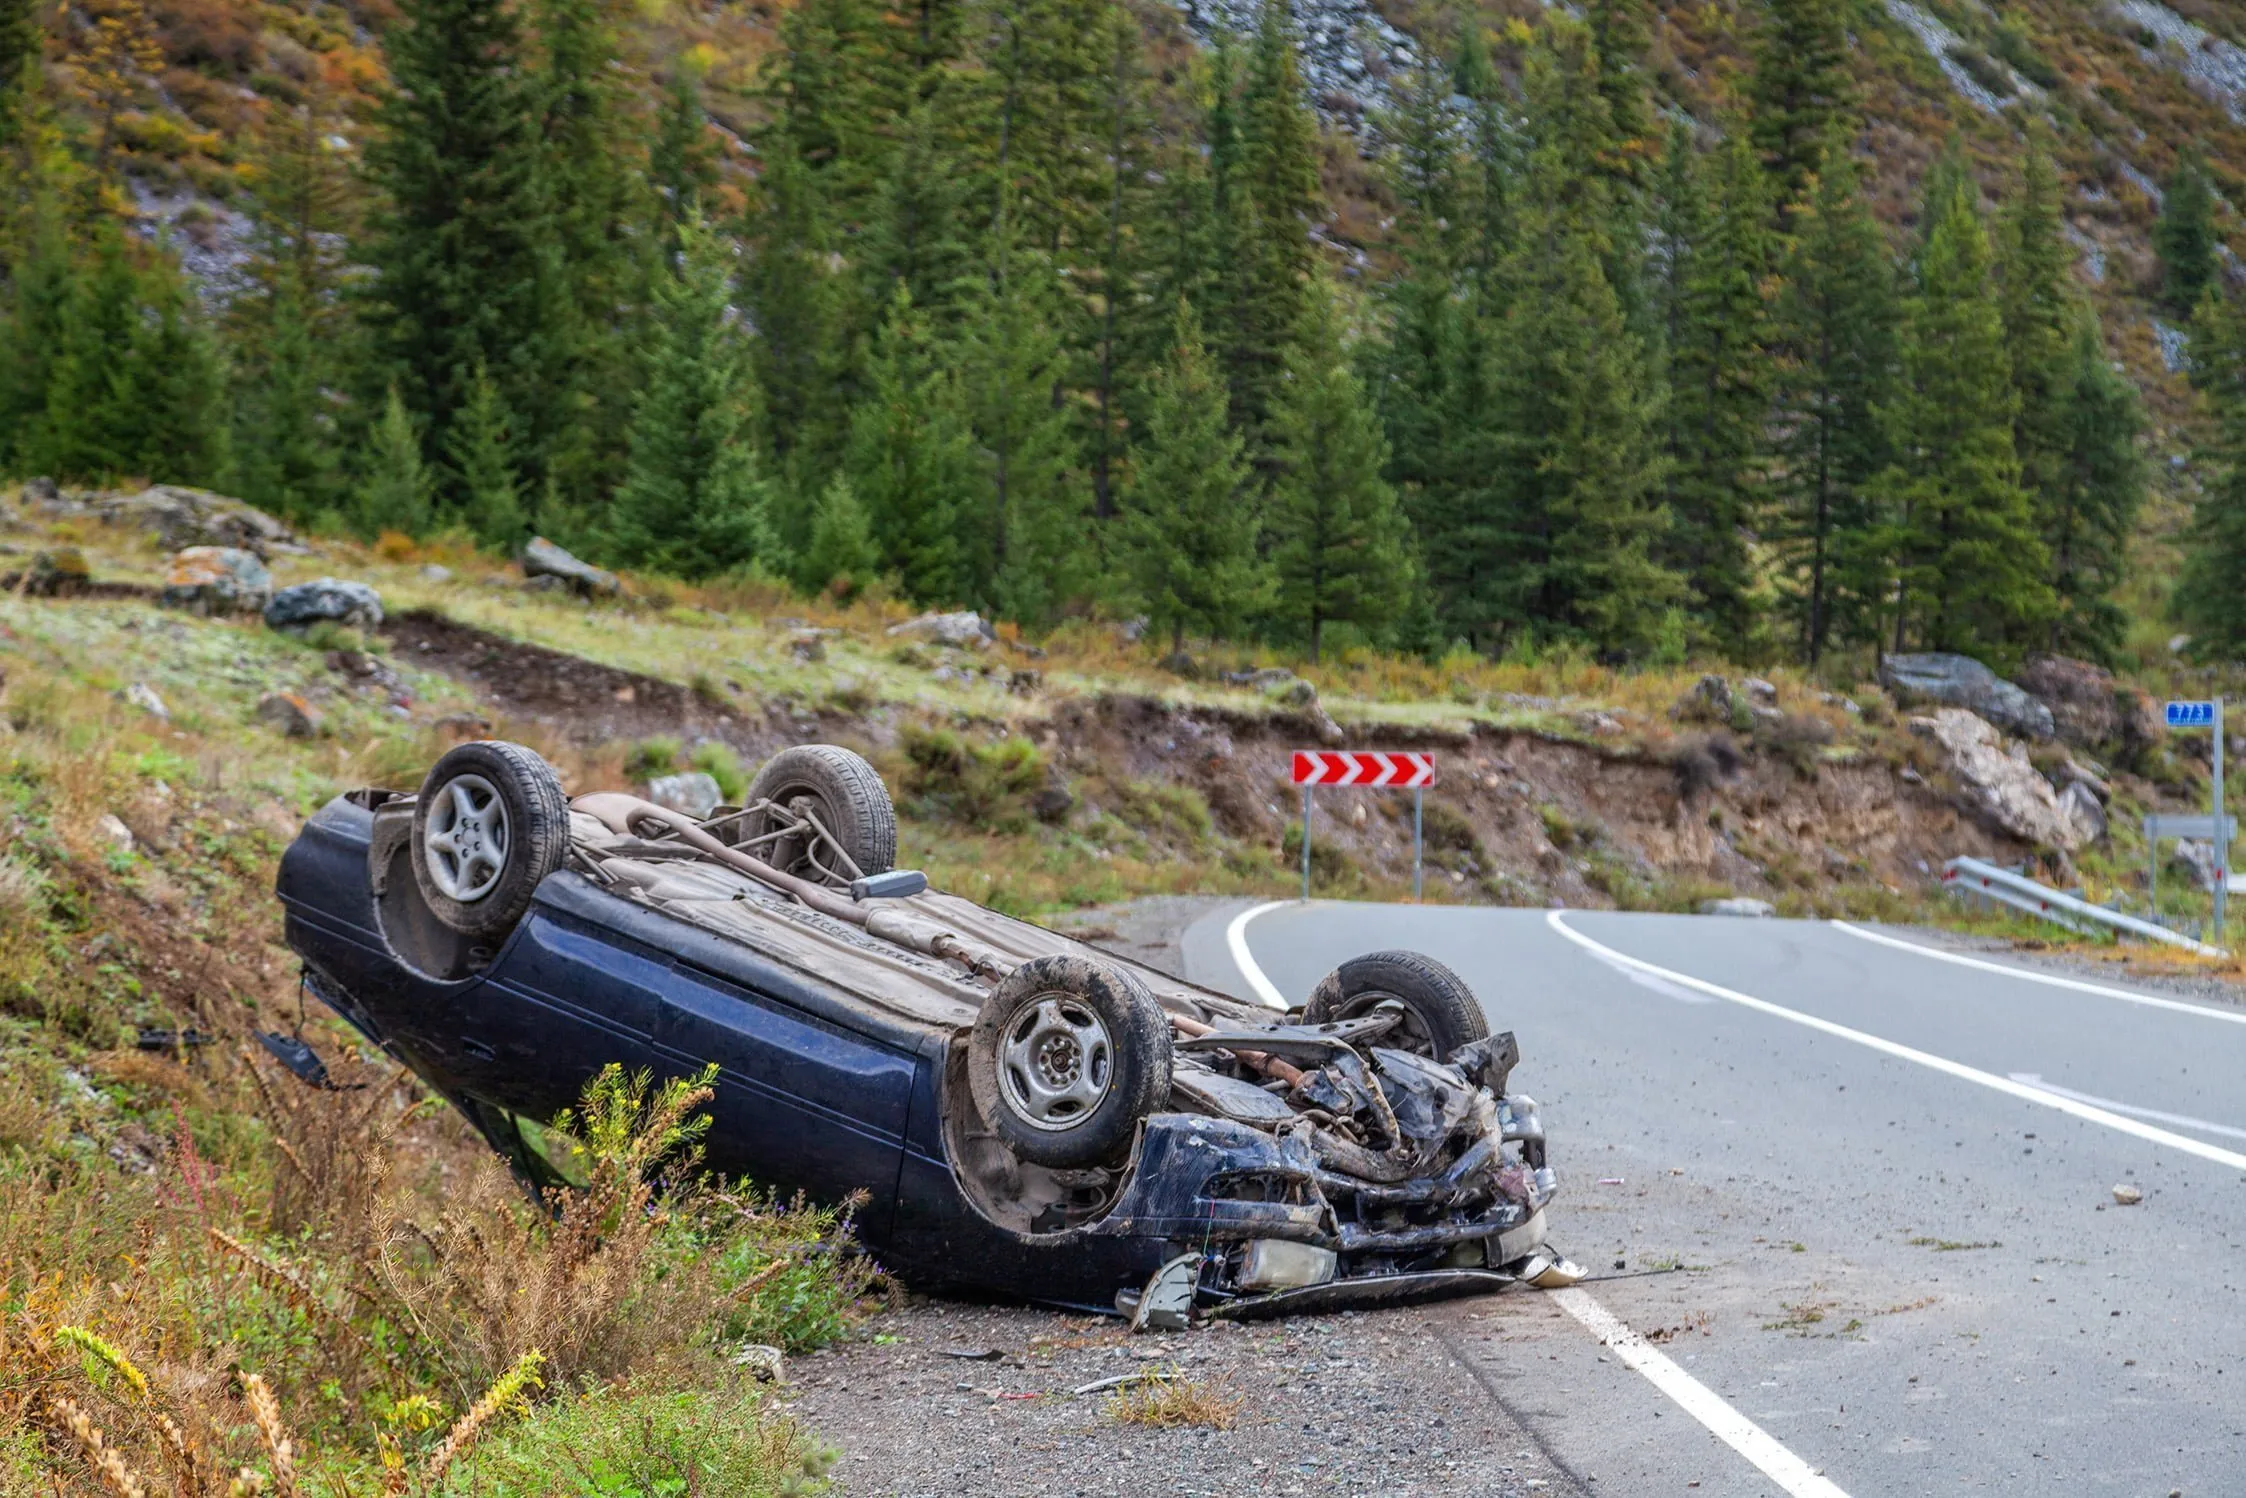 Car flipped upside down on the side of the road in the forest. If you’ve sustained an injury in a car accident, our Jackson car accident lawyers can help you get the compensation you deserve.